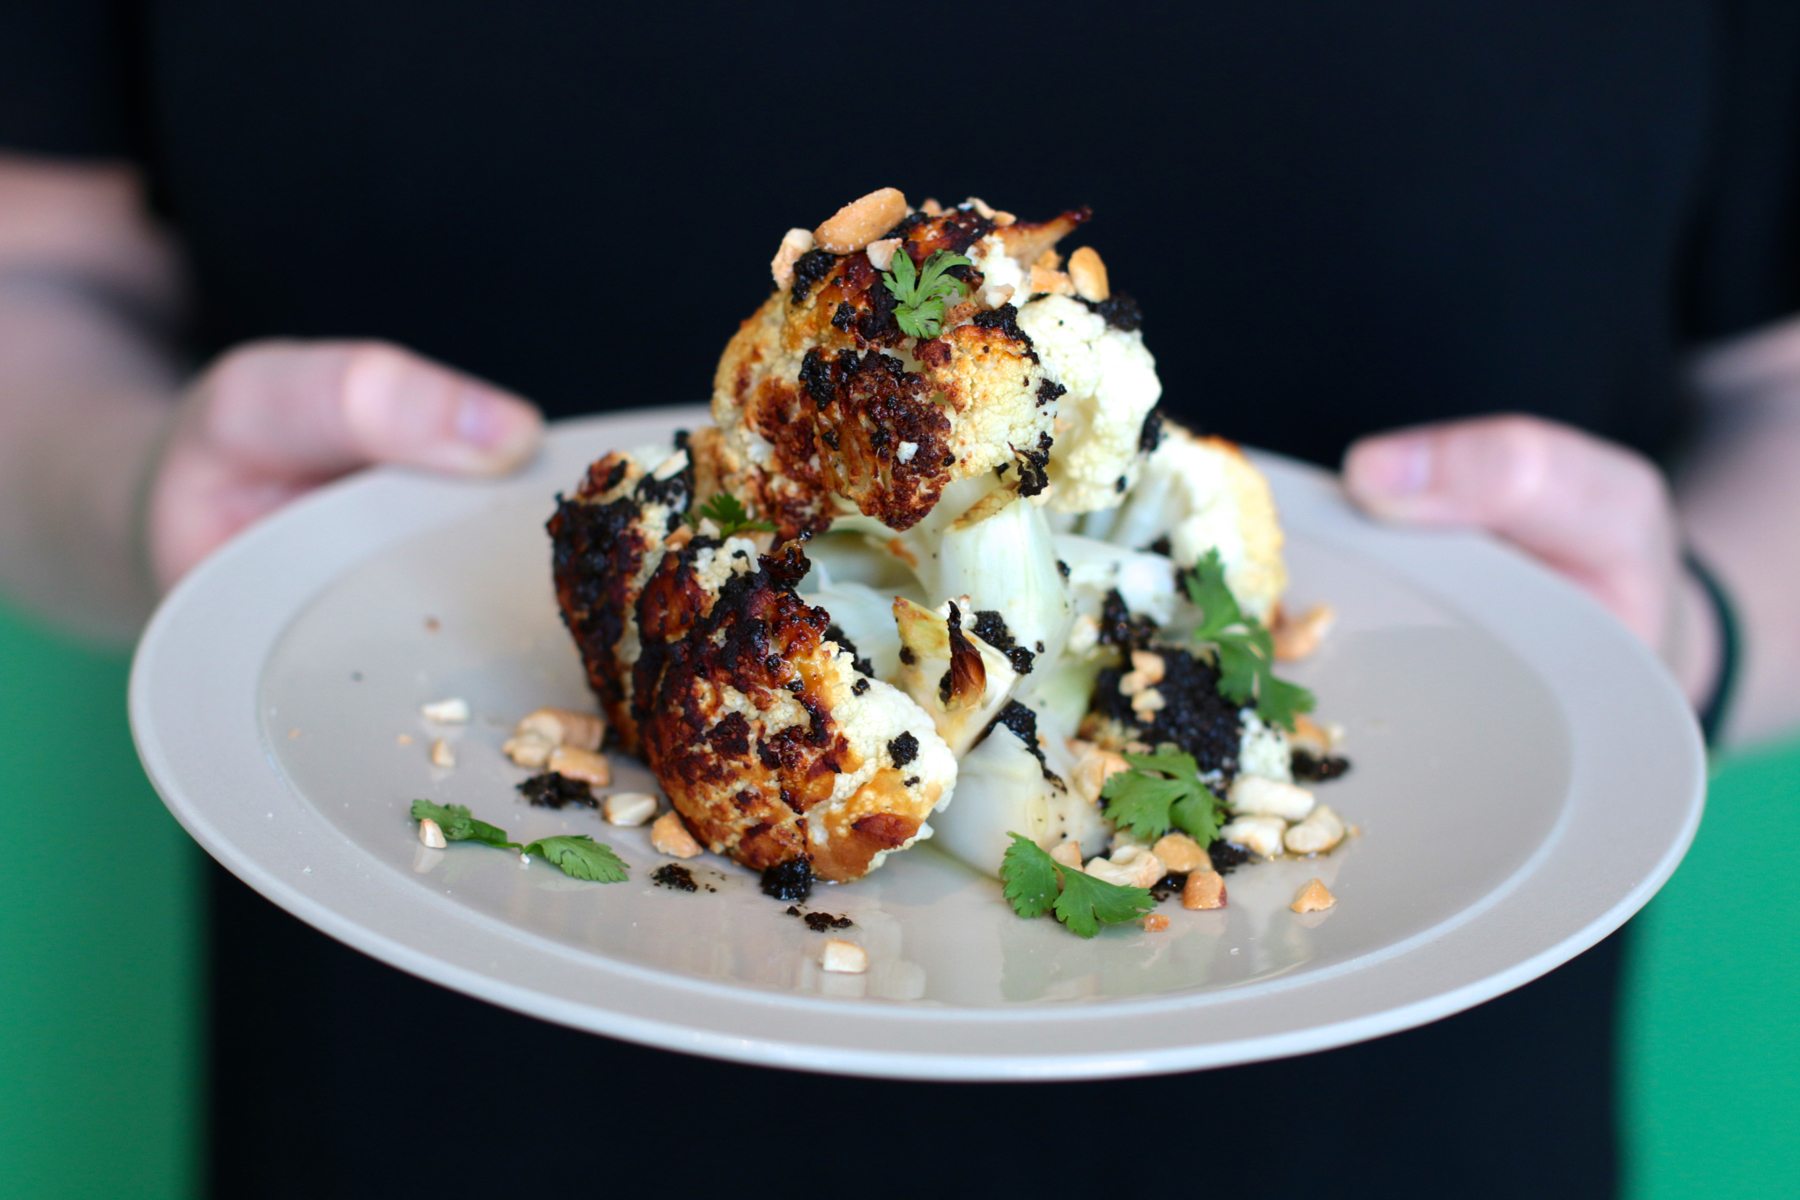 The miso cauliflower is marinated for two days before being slathered in black garlic and tossed in the oven. The florets are then topped with roasted cashews, parmesan and cilantro. $5.